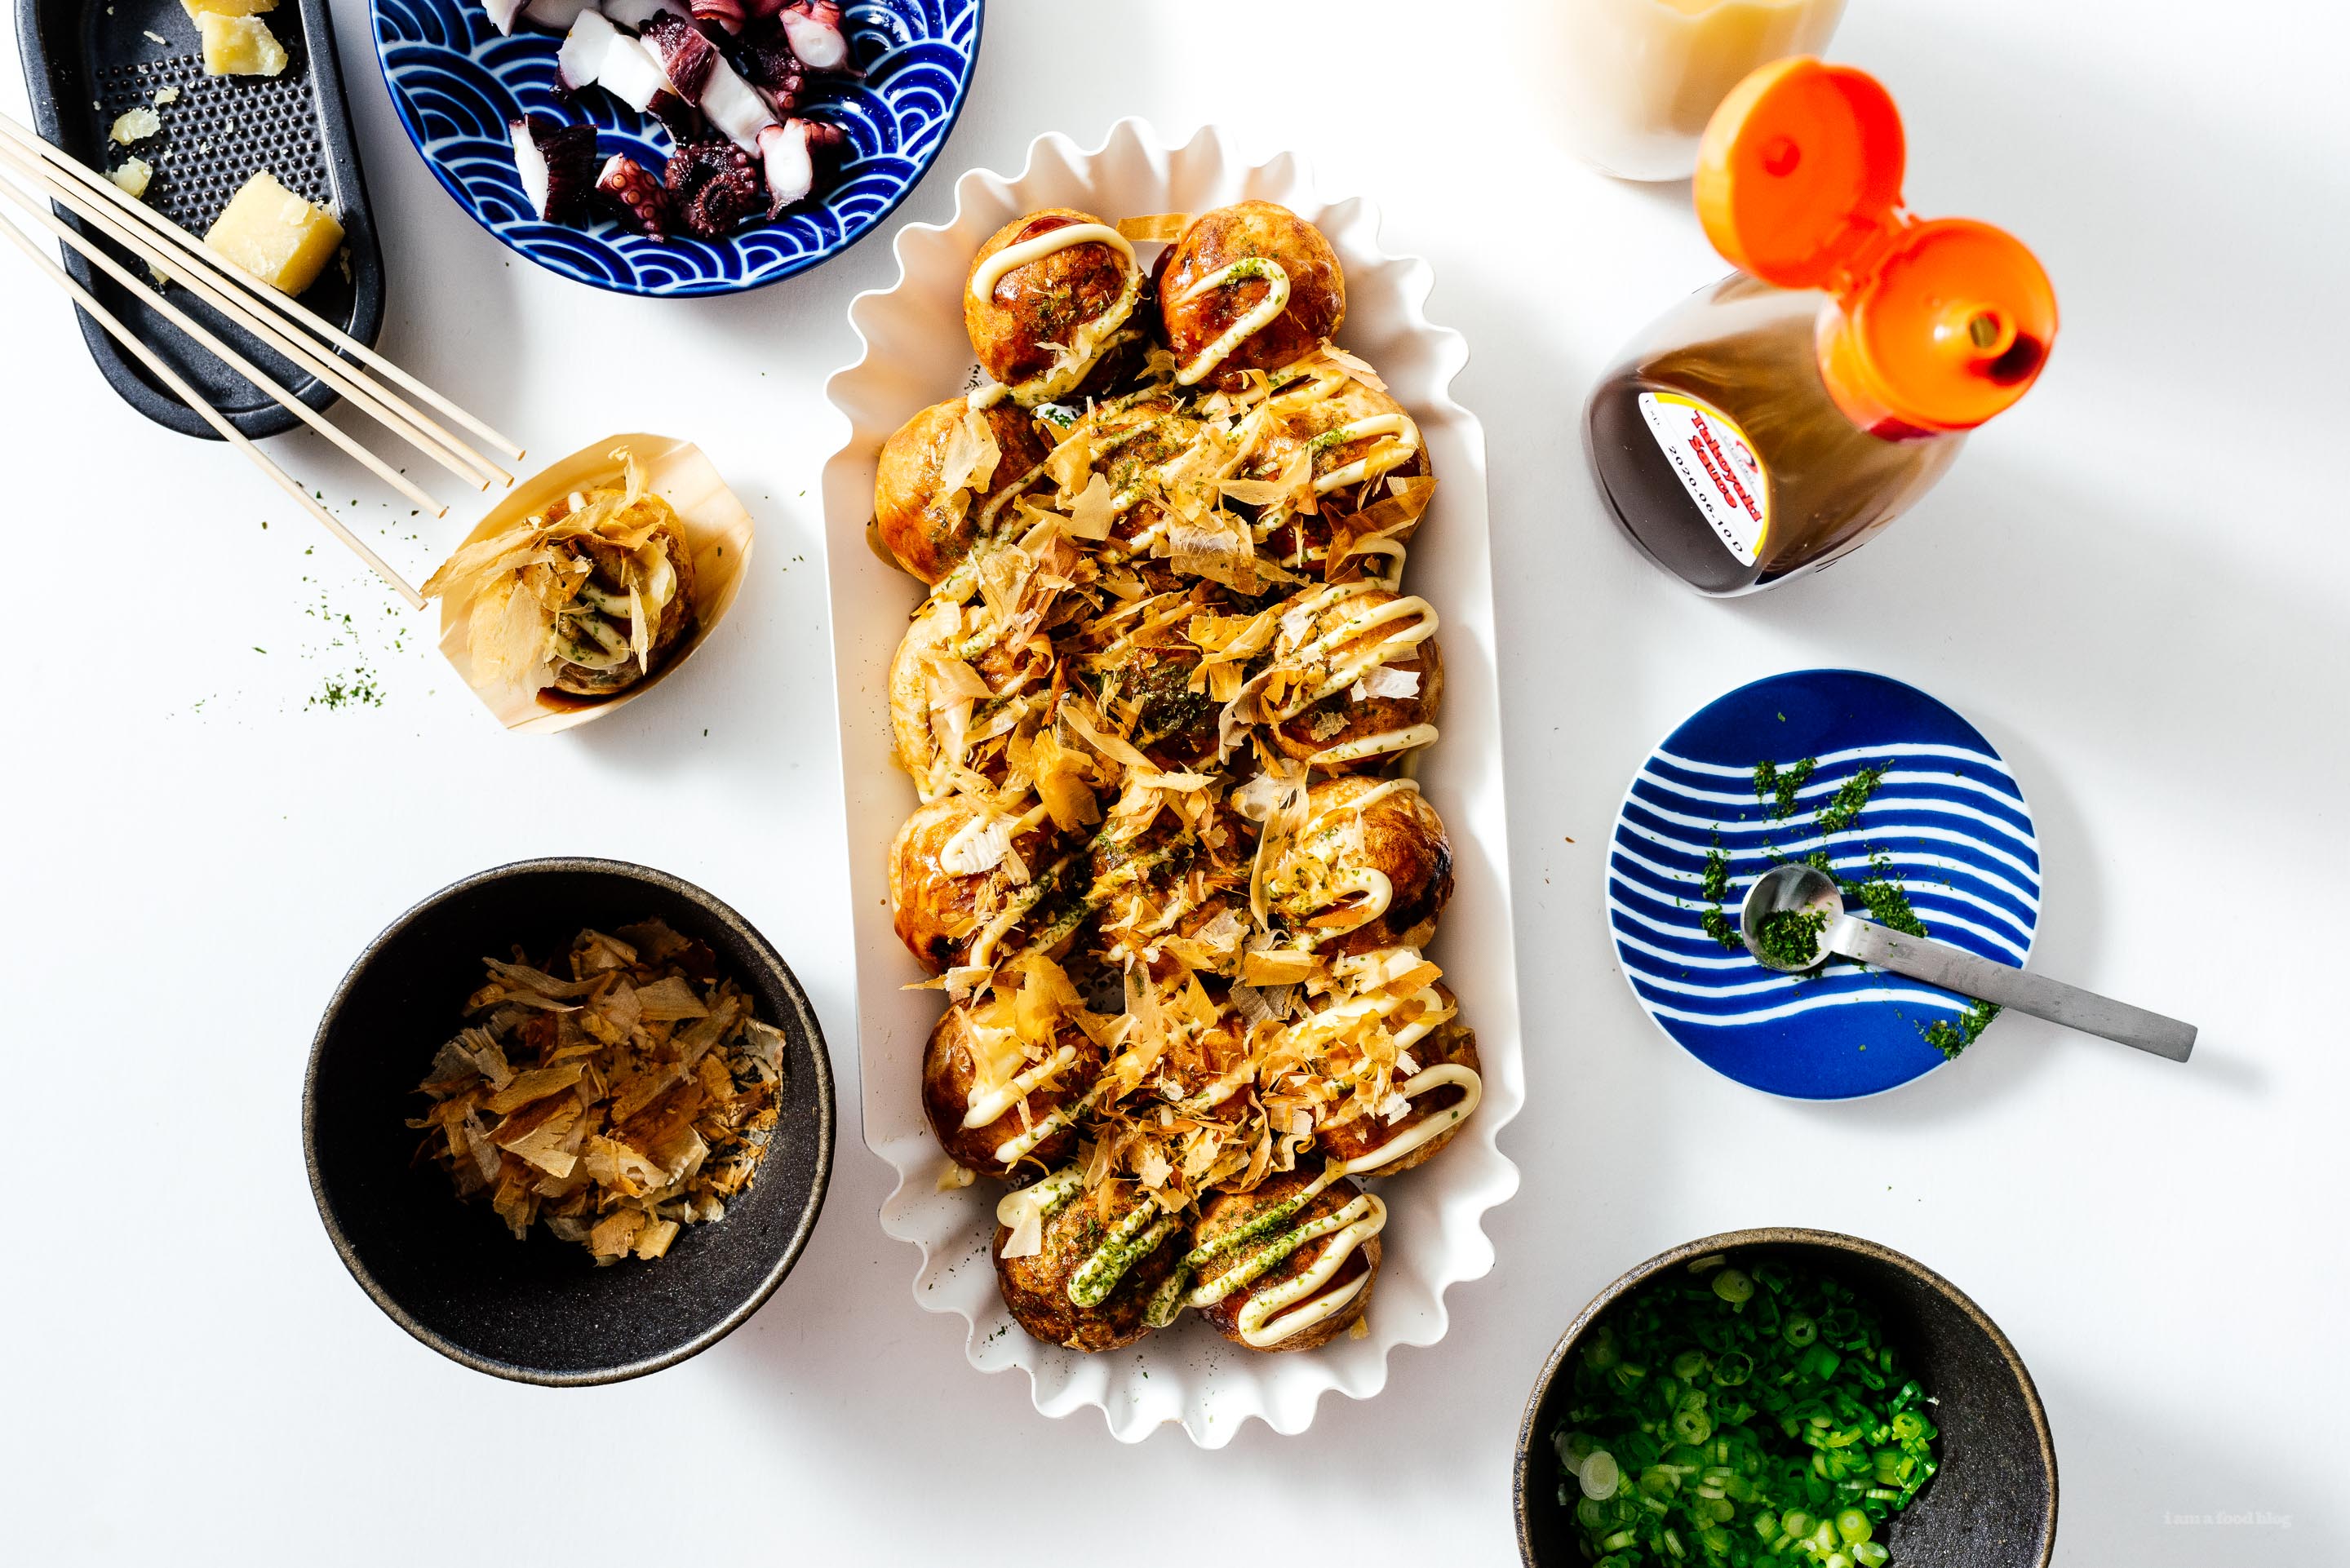 This is the Best Dinner Party Food Ever: an Easy Authentic Takoyaki Recipe to Make with Friends and Family